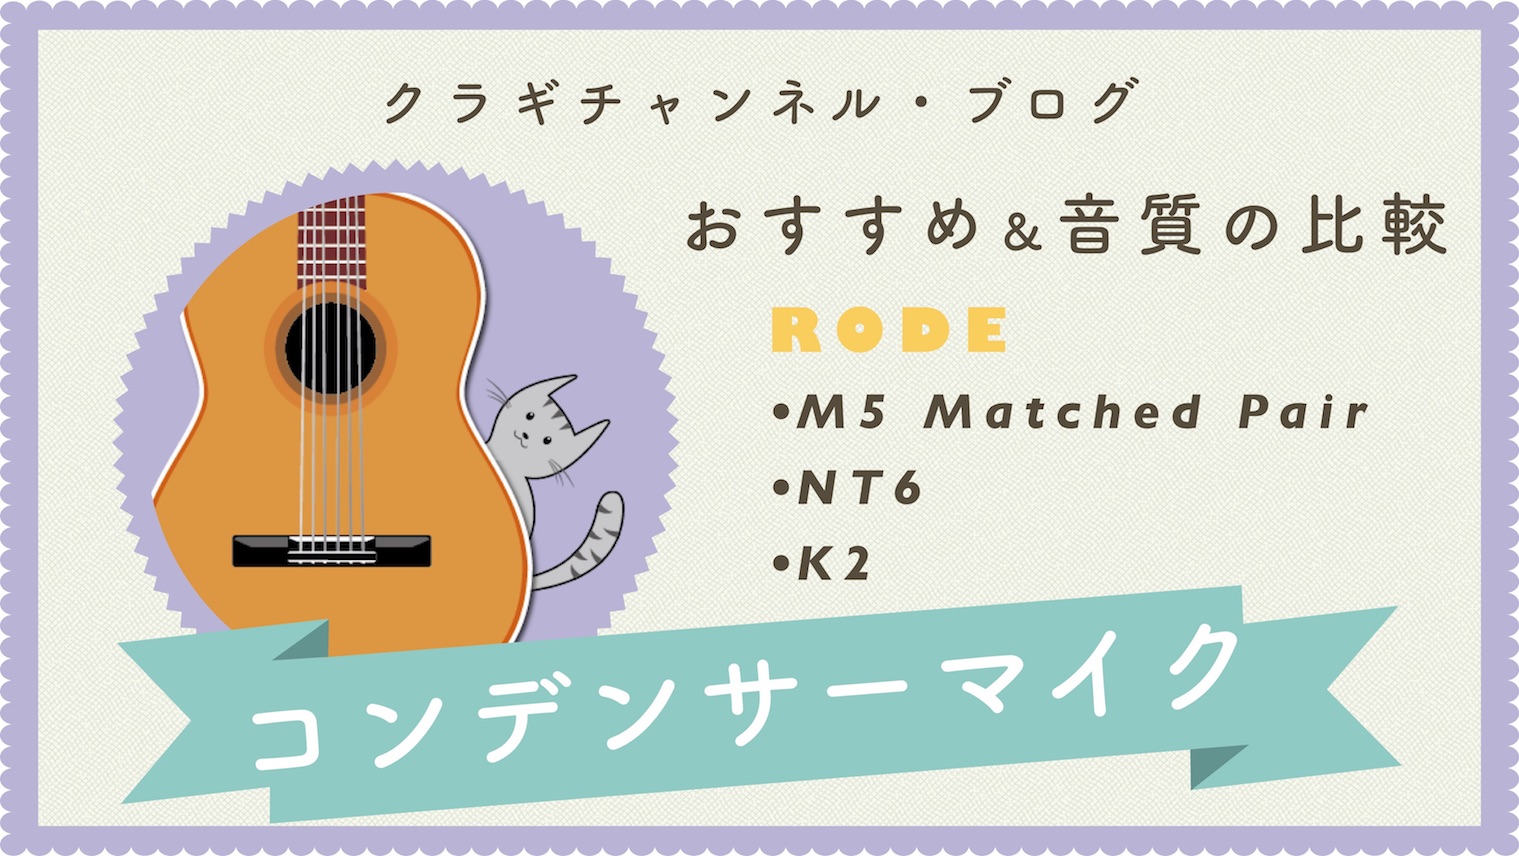 RODEステレオペアマッチングコンデンサーマイクM5 Matched Pair24V48V